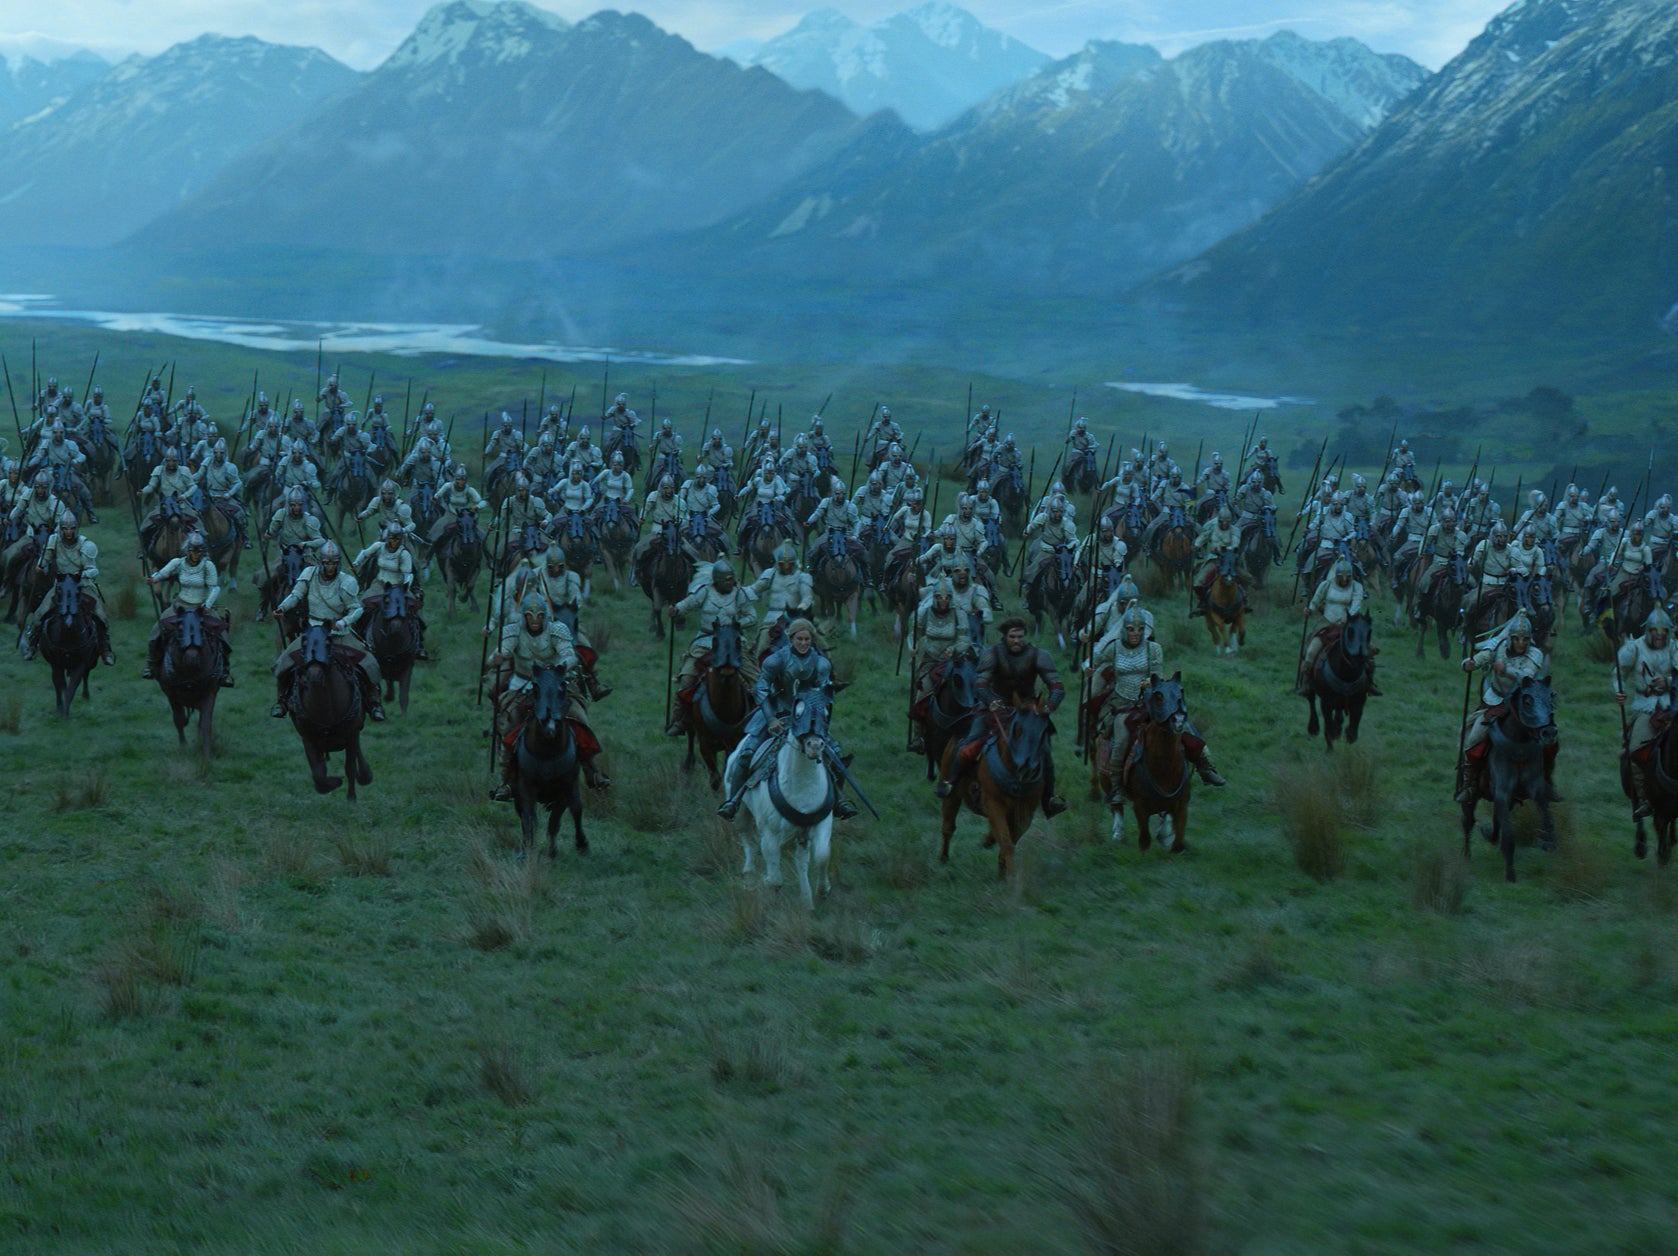 Galadriel (Morfydd Clark) leads the charge